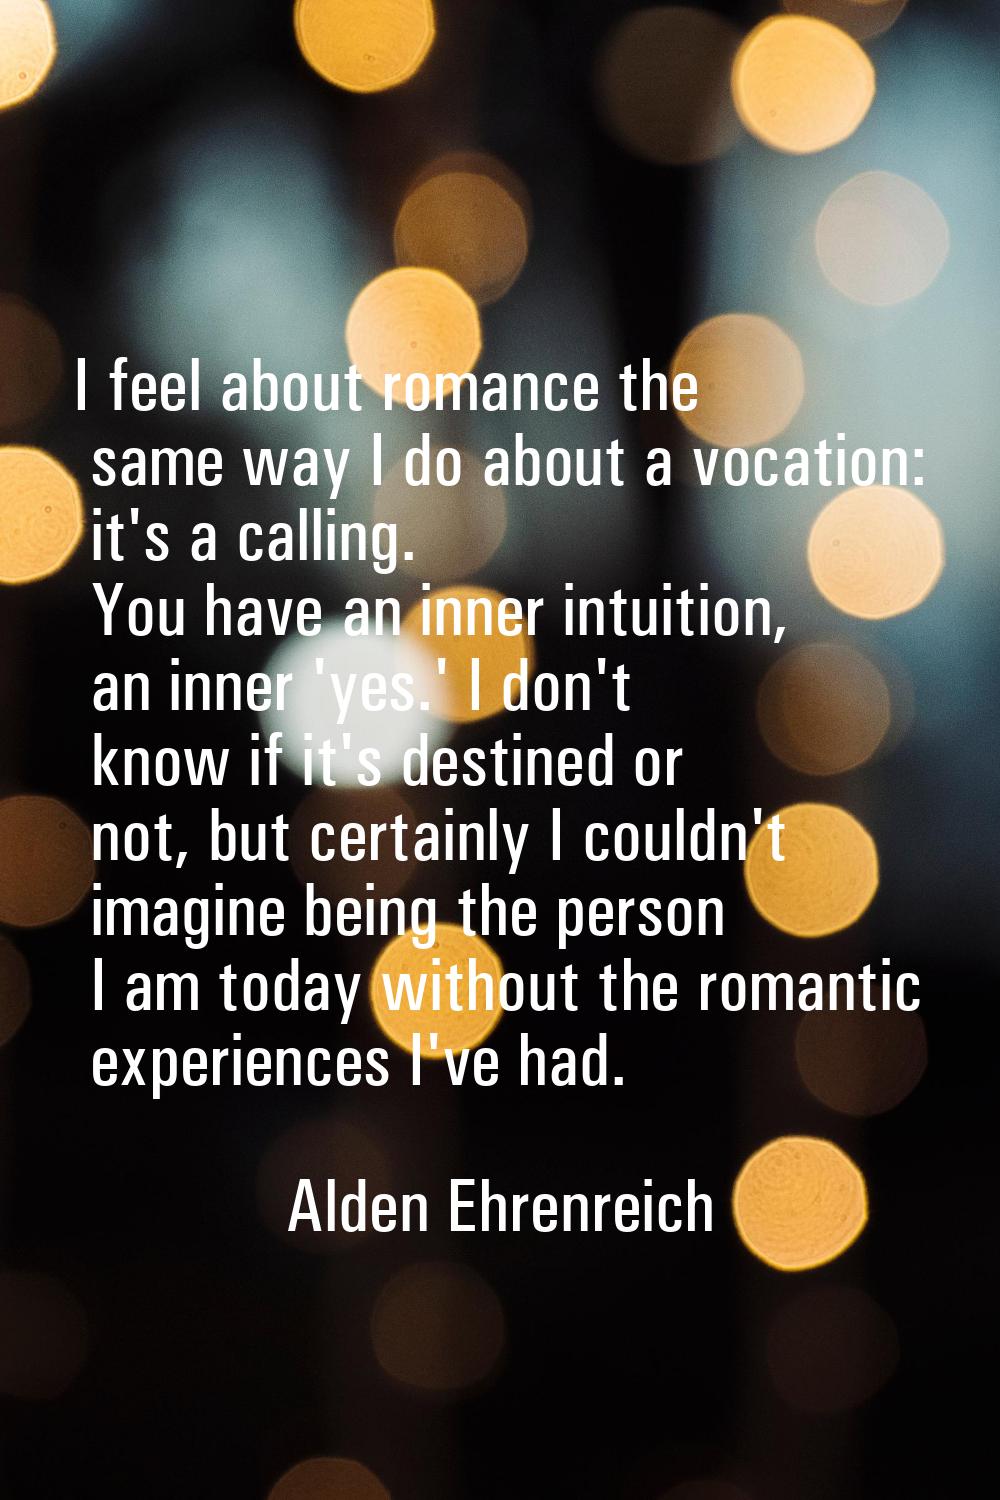 I feel about romance the same way I do about a vocation: it's a calling. You have an inner intuitio